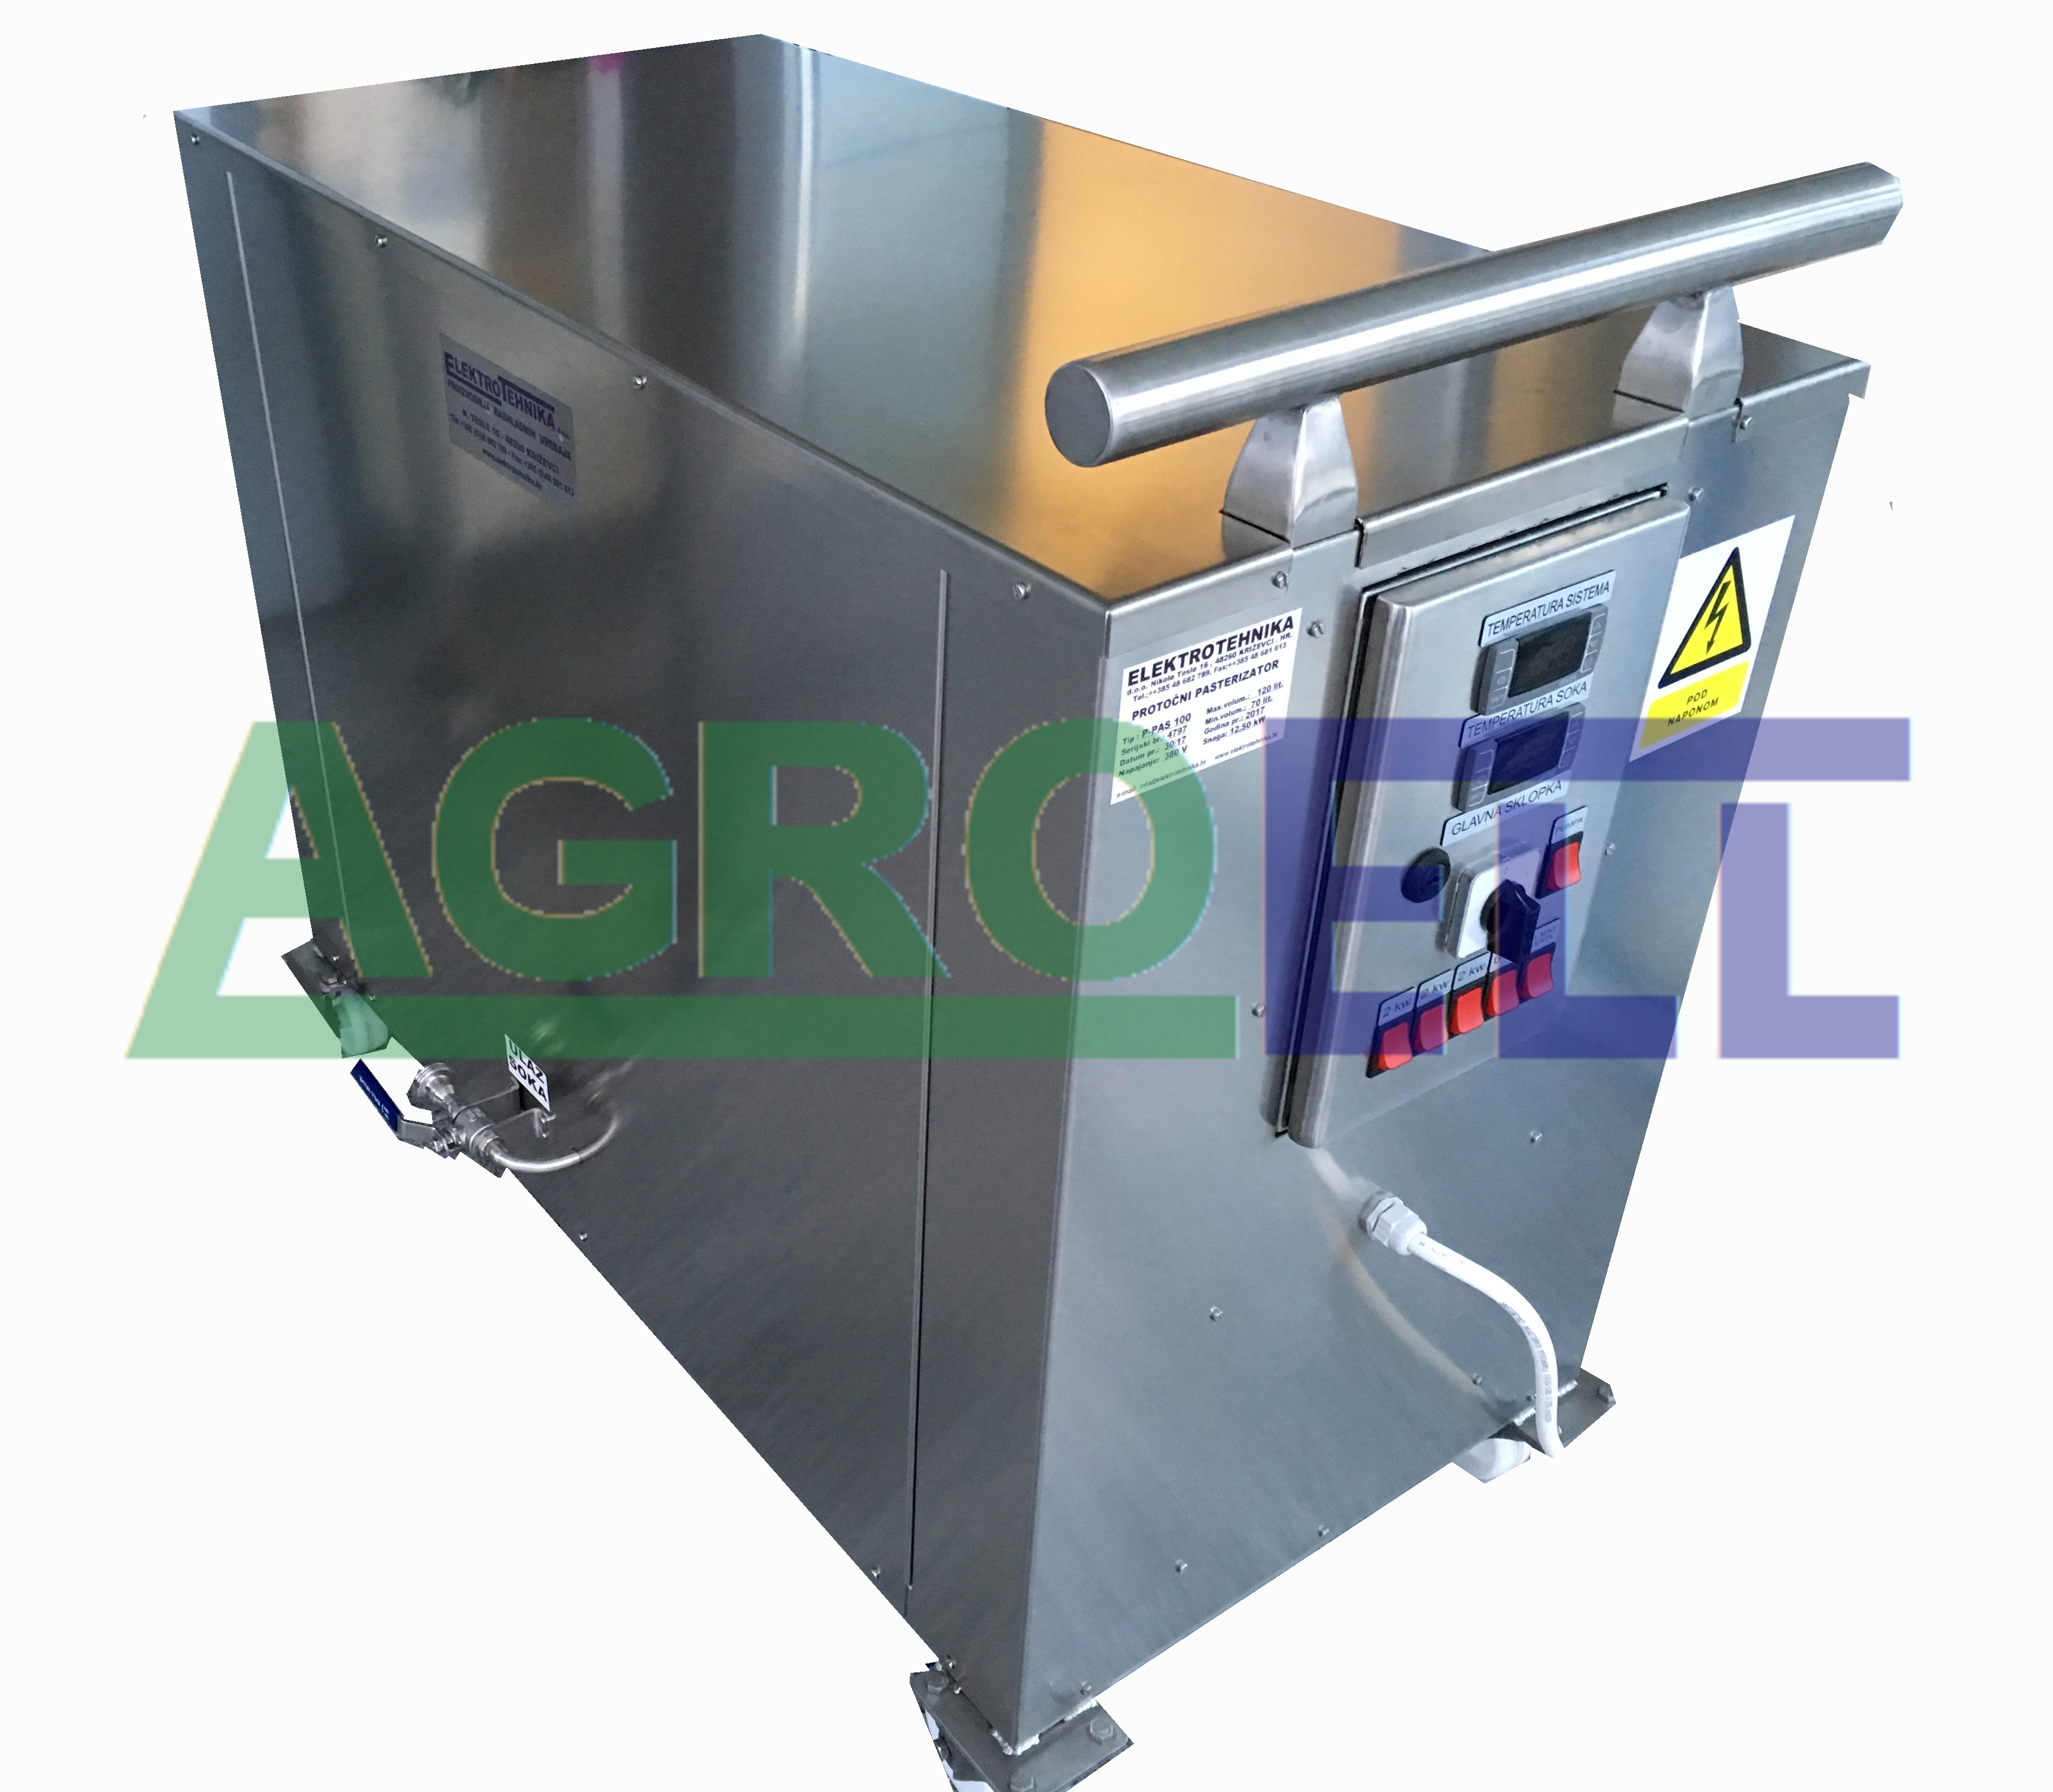 Fruit and vegetables processing